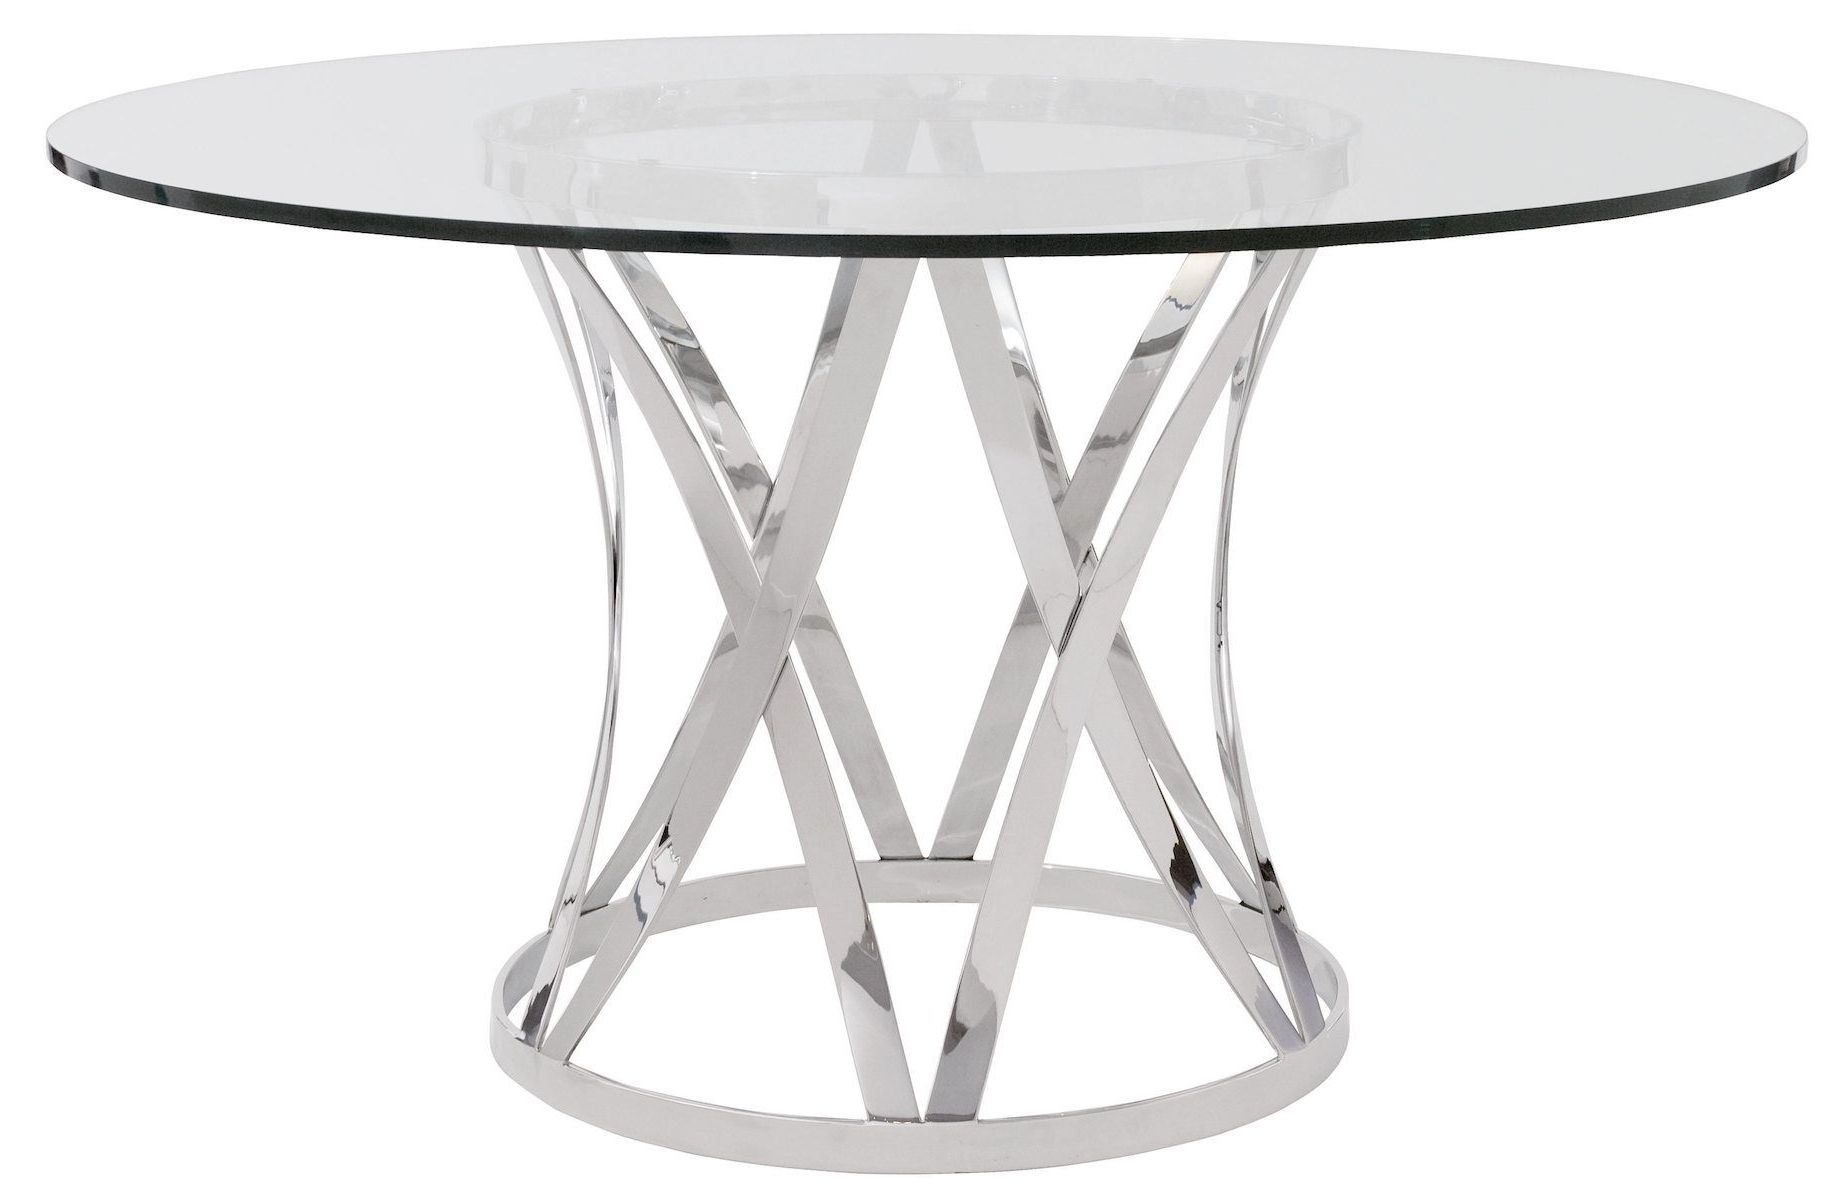 Contemporary Glass Top Round Dining Table With Chrome With Regard To Recent Eames Style Dining Tables With Chromed Leg And Tempered Glass Top (View 7 of 25)